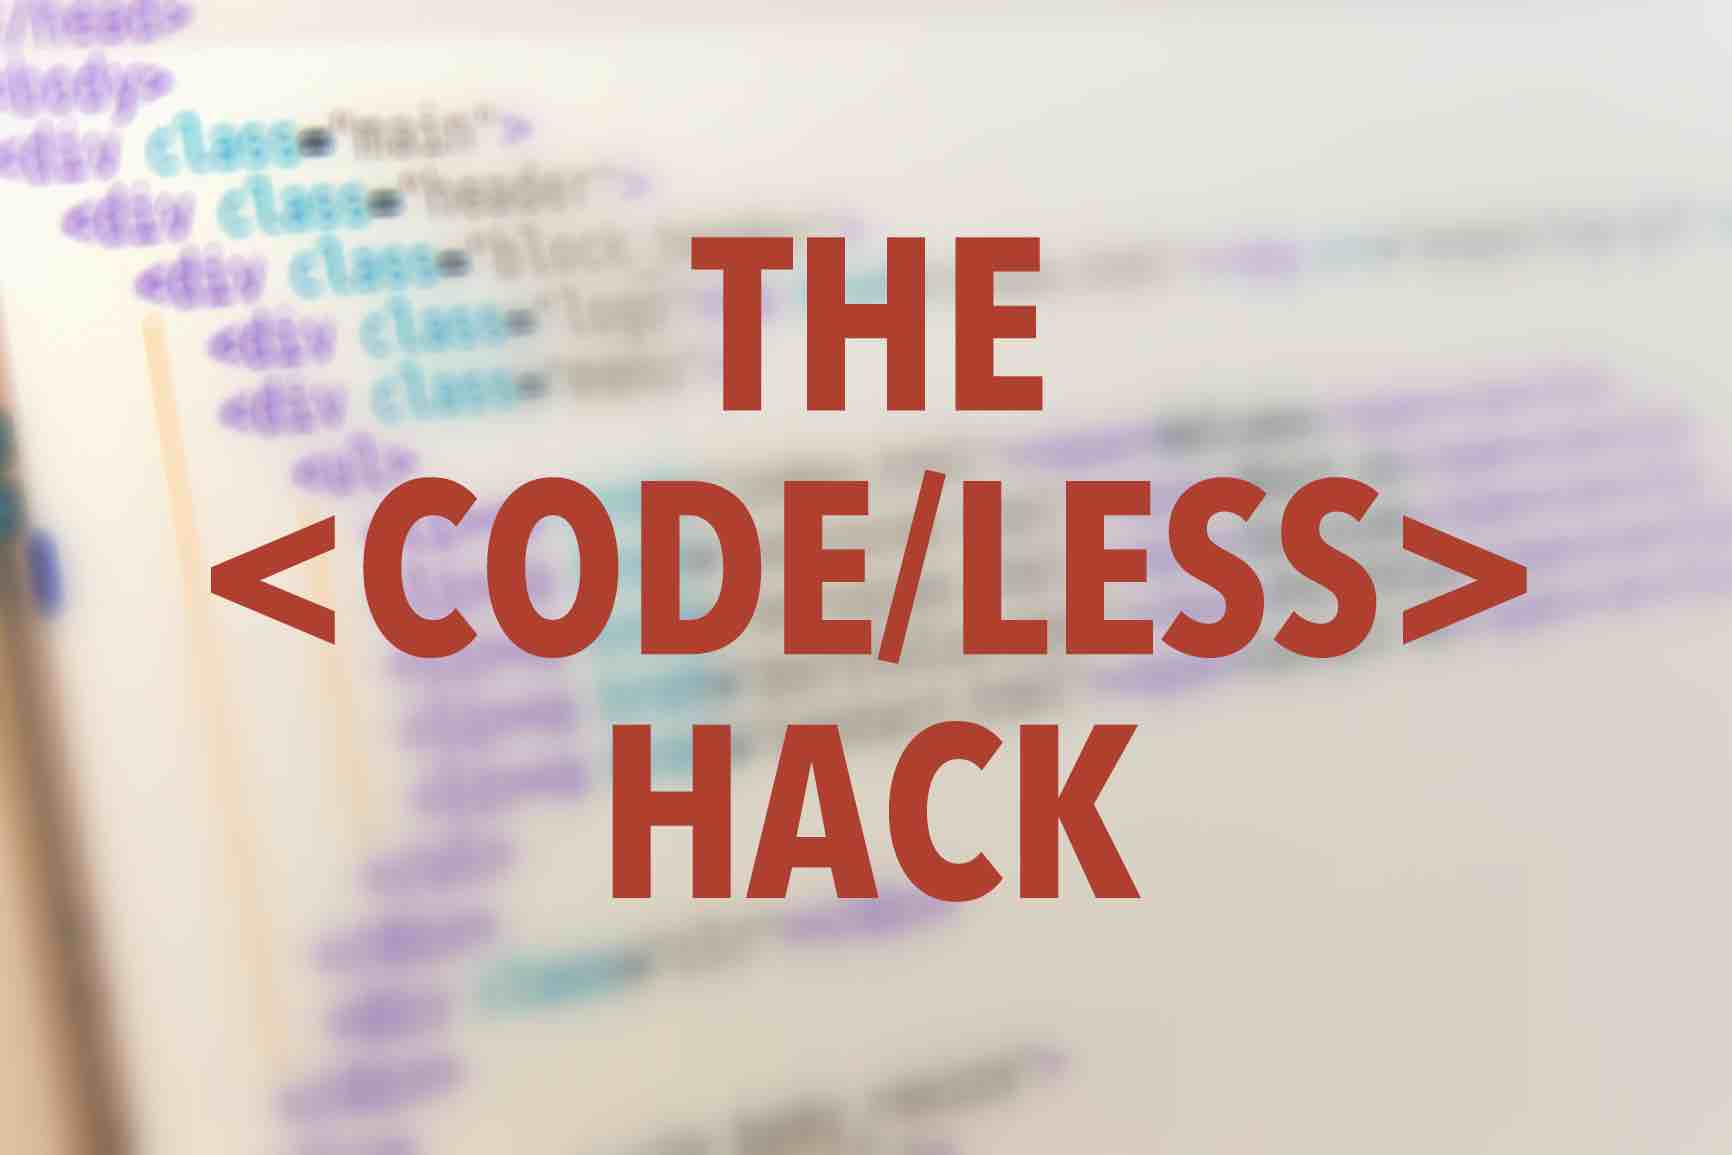 How a Codeless Hack Won $5000 at Facebook Hackathon Without a Single Line of Code